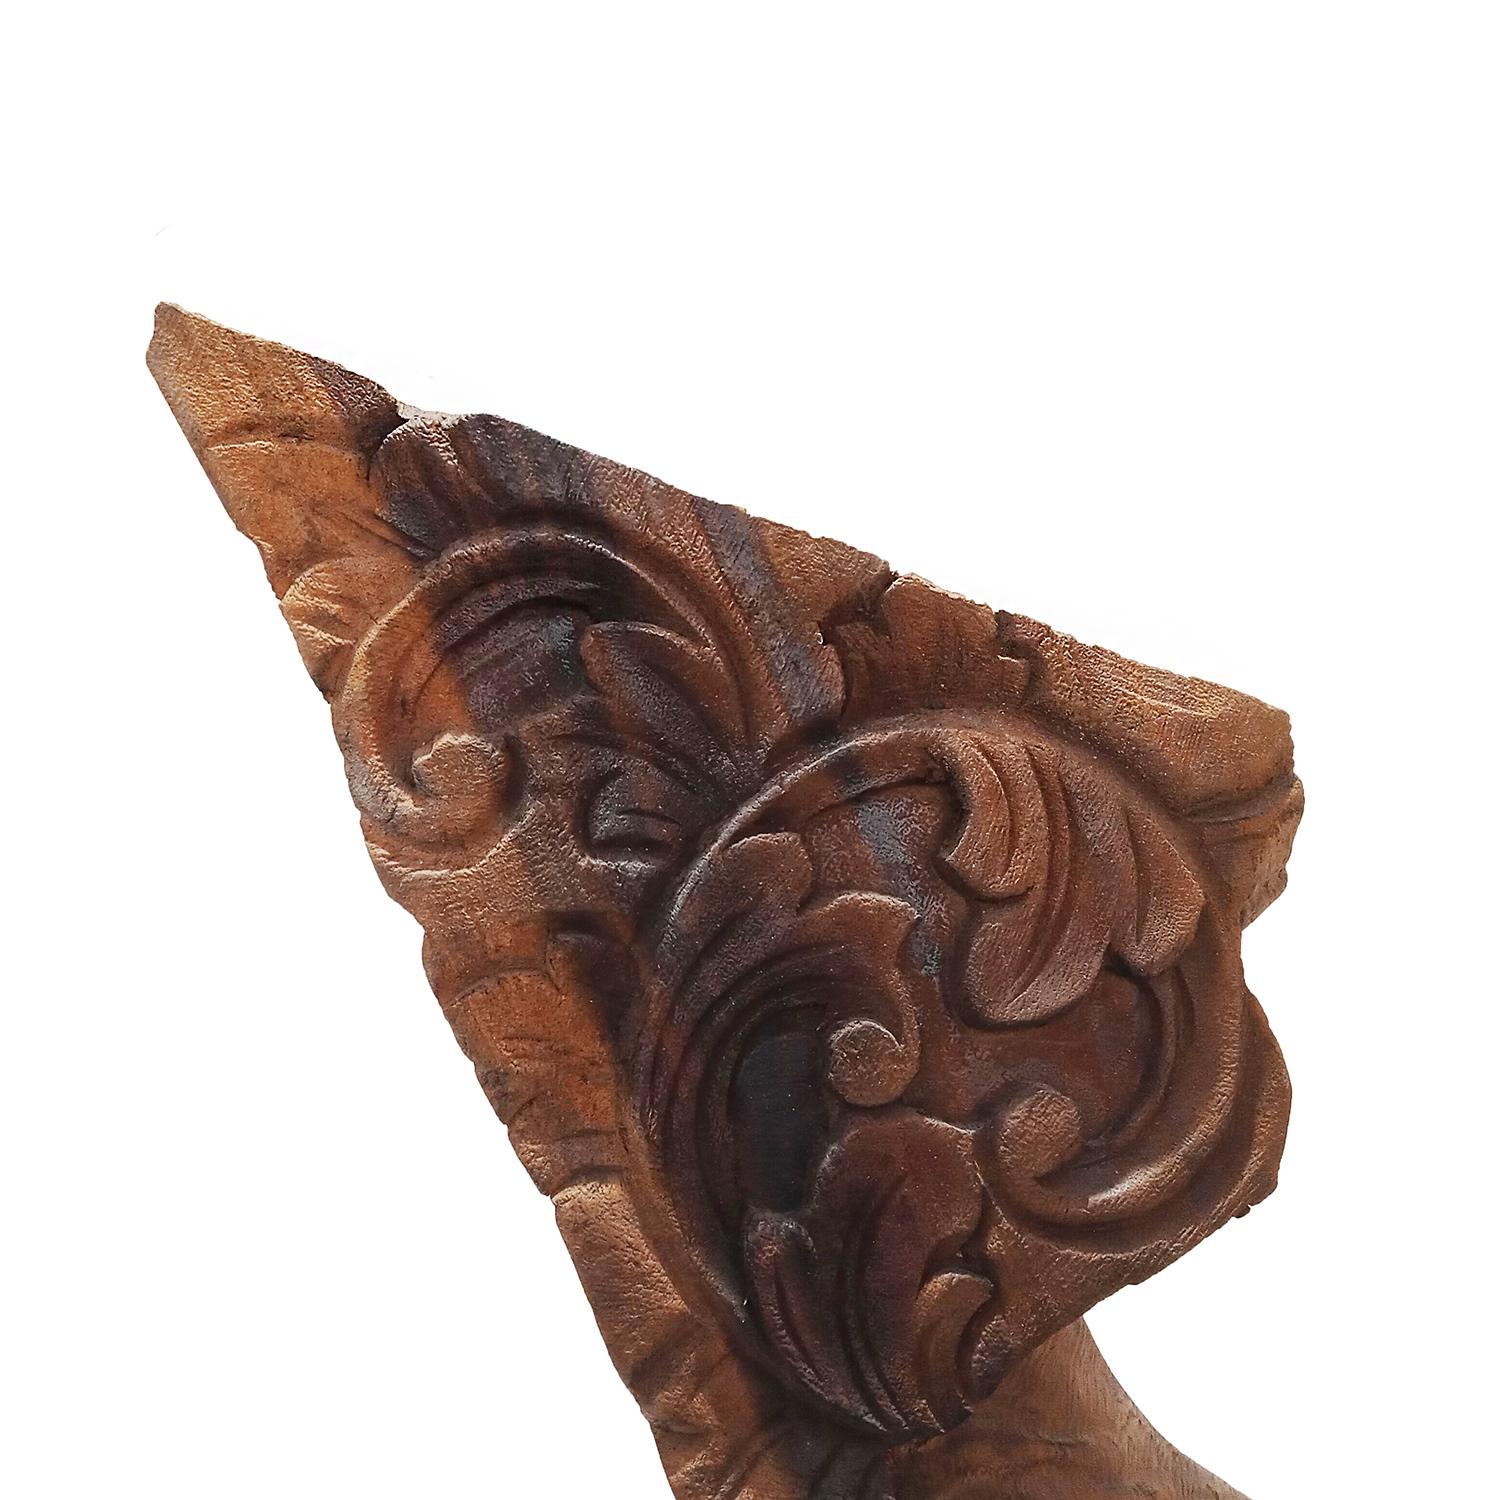 Indonesian Reclaimed Wood Sculpture, Wing-Shaped For Sale 3